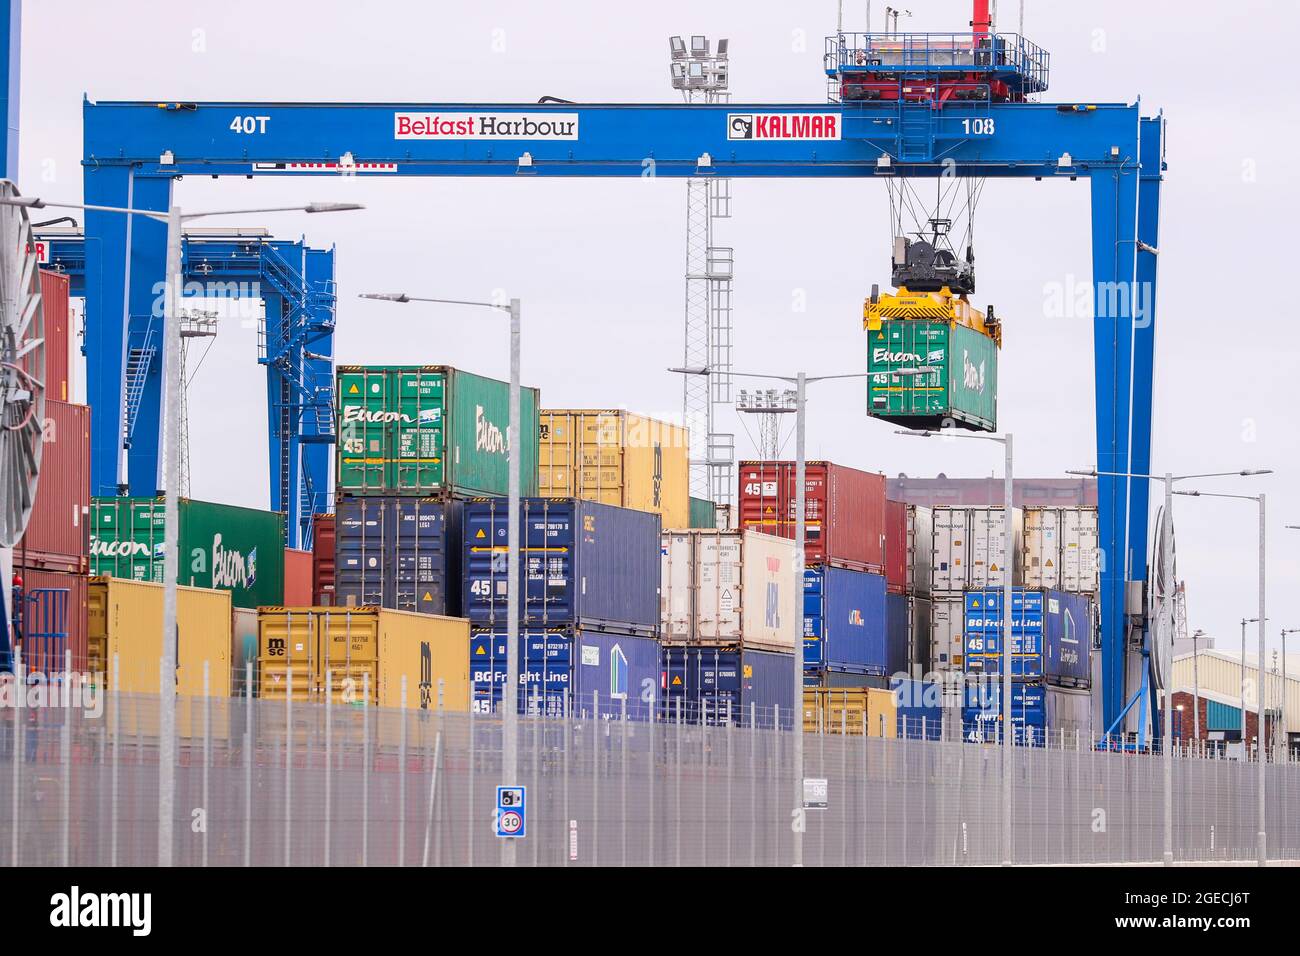 Belfast Container Terminal at The Port of Belfast, Northern Ireland.  The port handles the biggest percentage of imports and exports for the country. Stock Photo